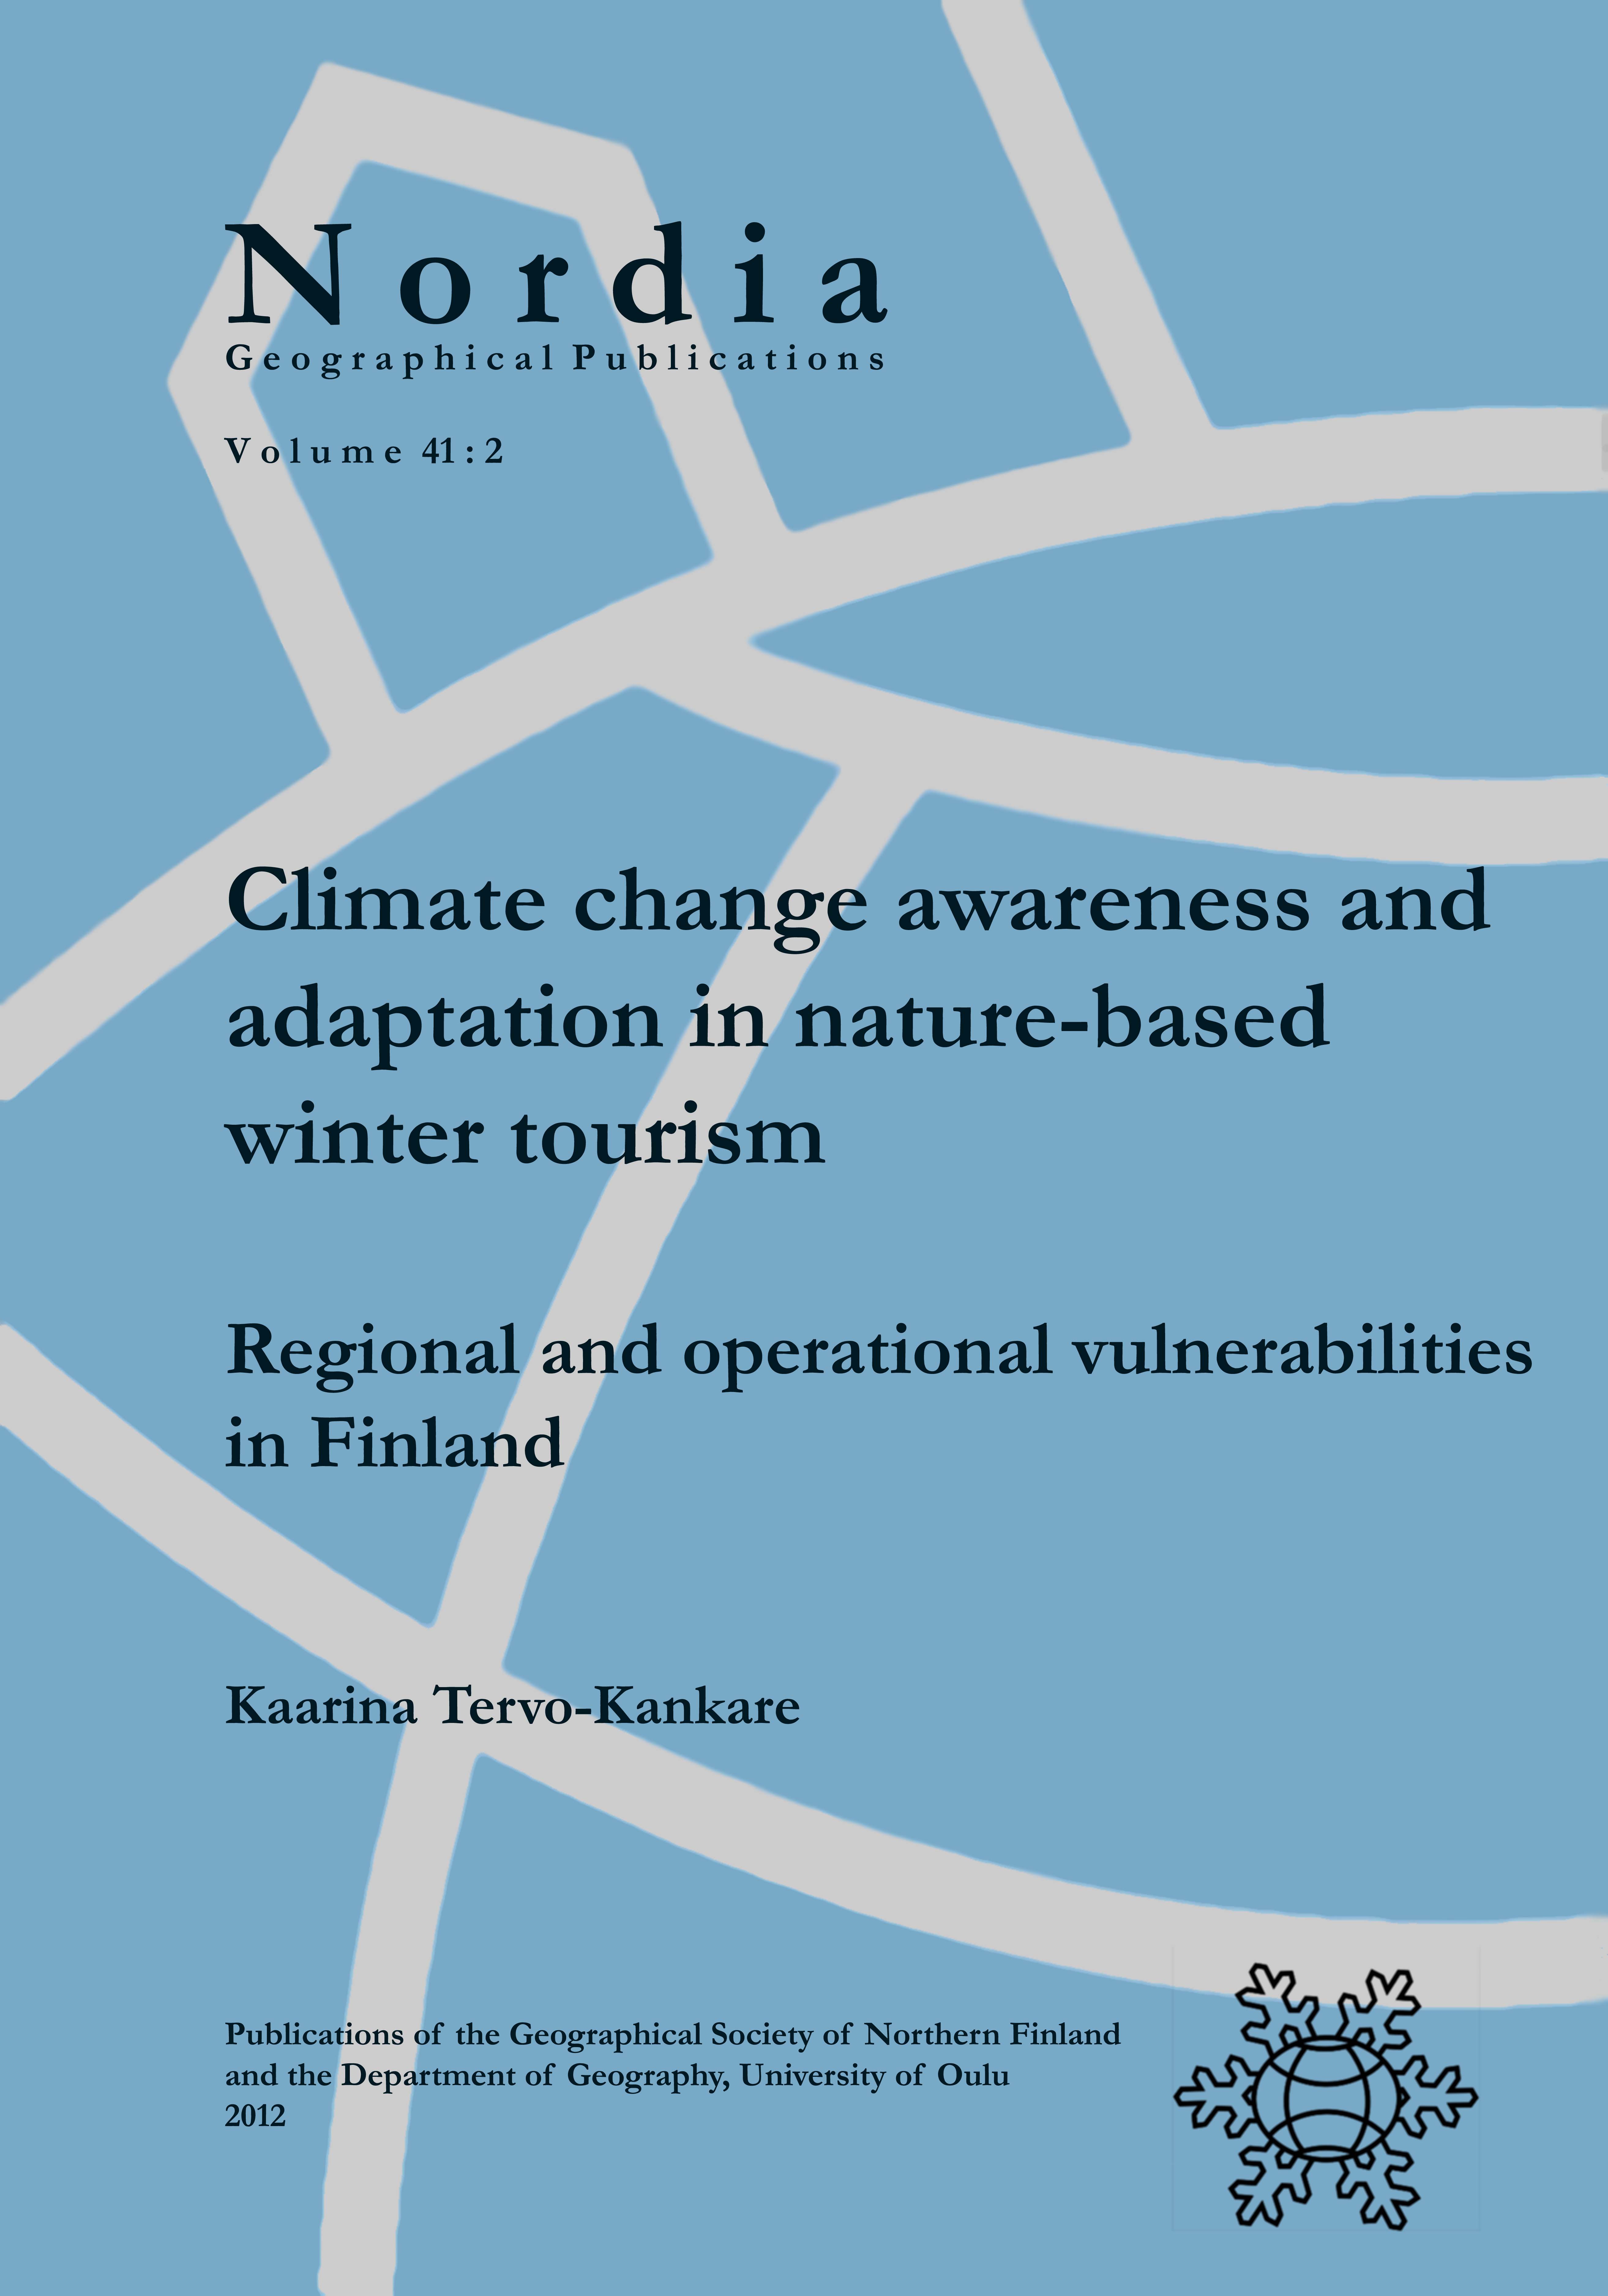 					View Vol. 41 No. 2 (2012): Climate change awareness and adaptation in nature-based winter tourism: Regional and operational vulnerabilities in Finland
				